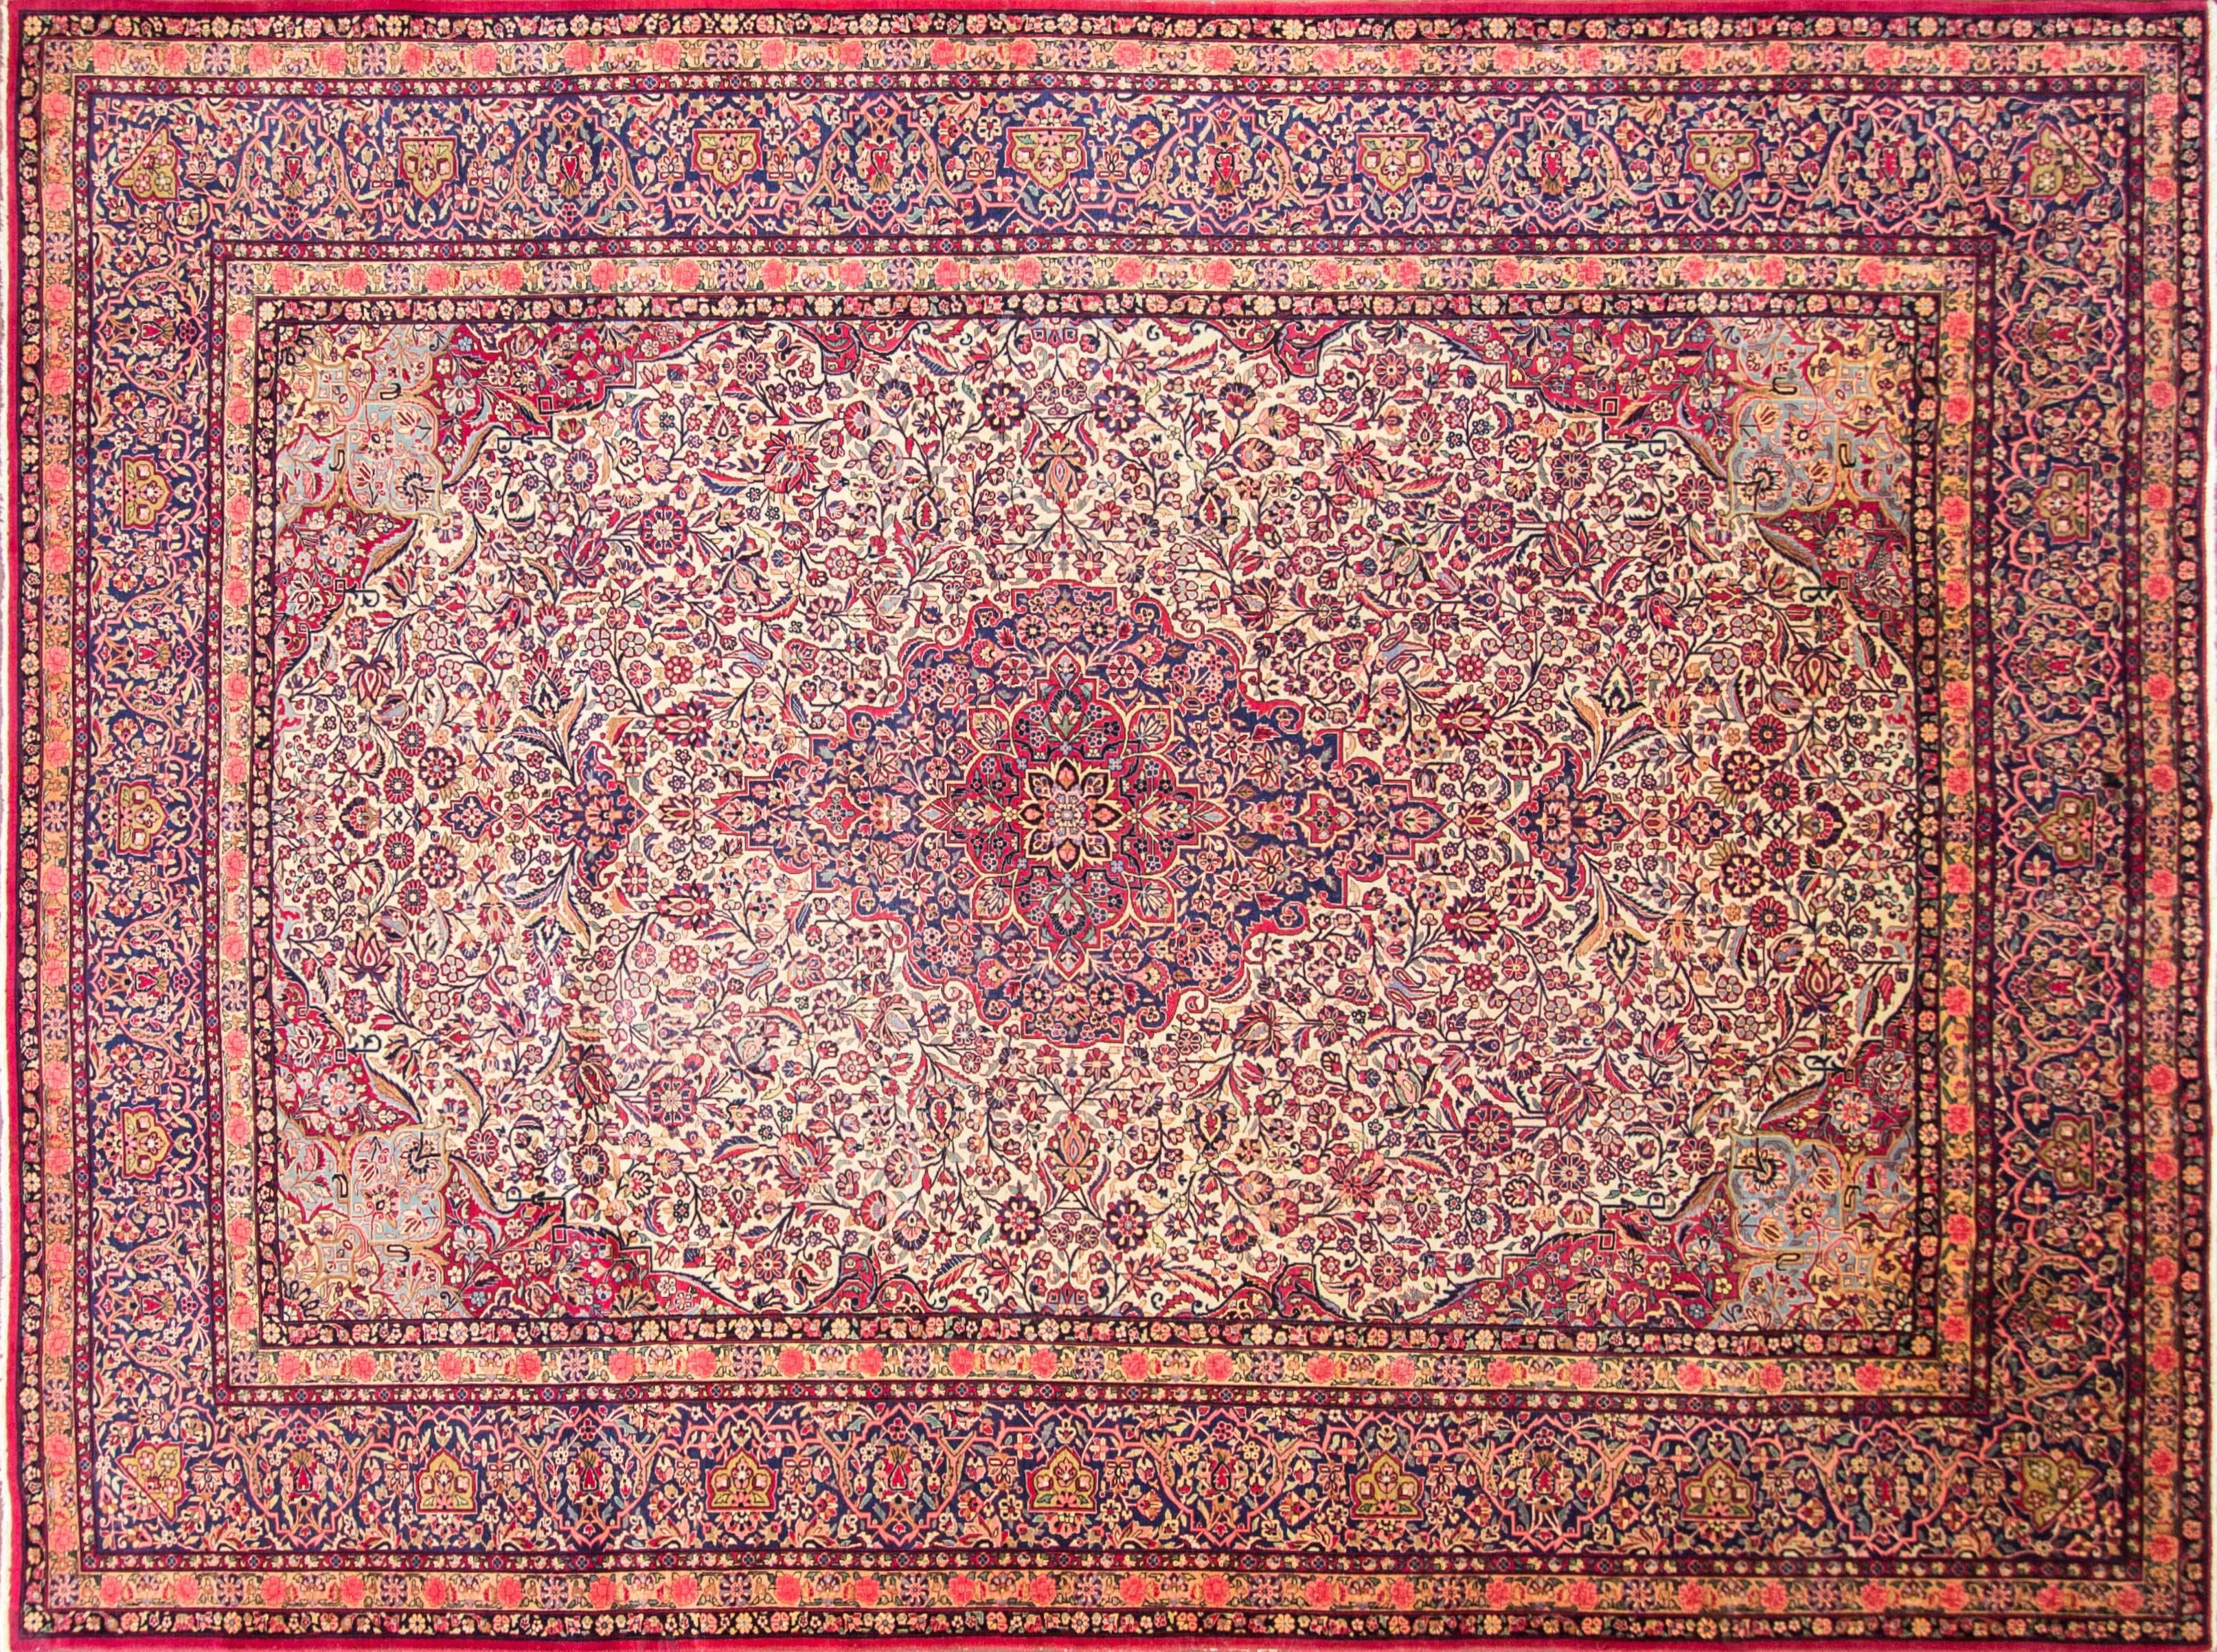 Very fine Persian Dabir Kashan in perfect condition, circa 1920. Unusual purple red background color. High density knotting woven from kork wool, creating an intricate design. From the mid-19th to the early 20th century the finest quality rugs from